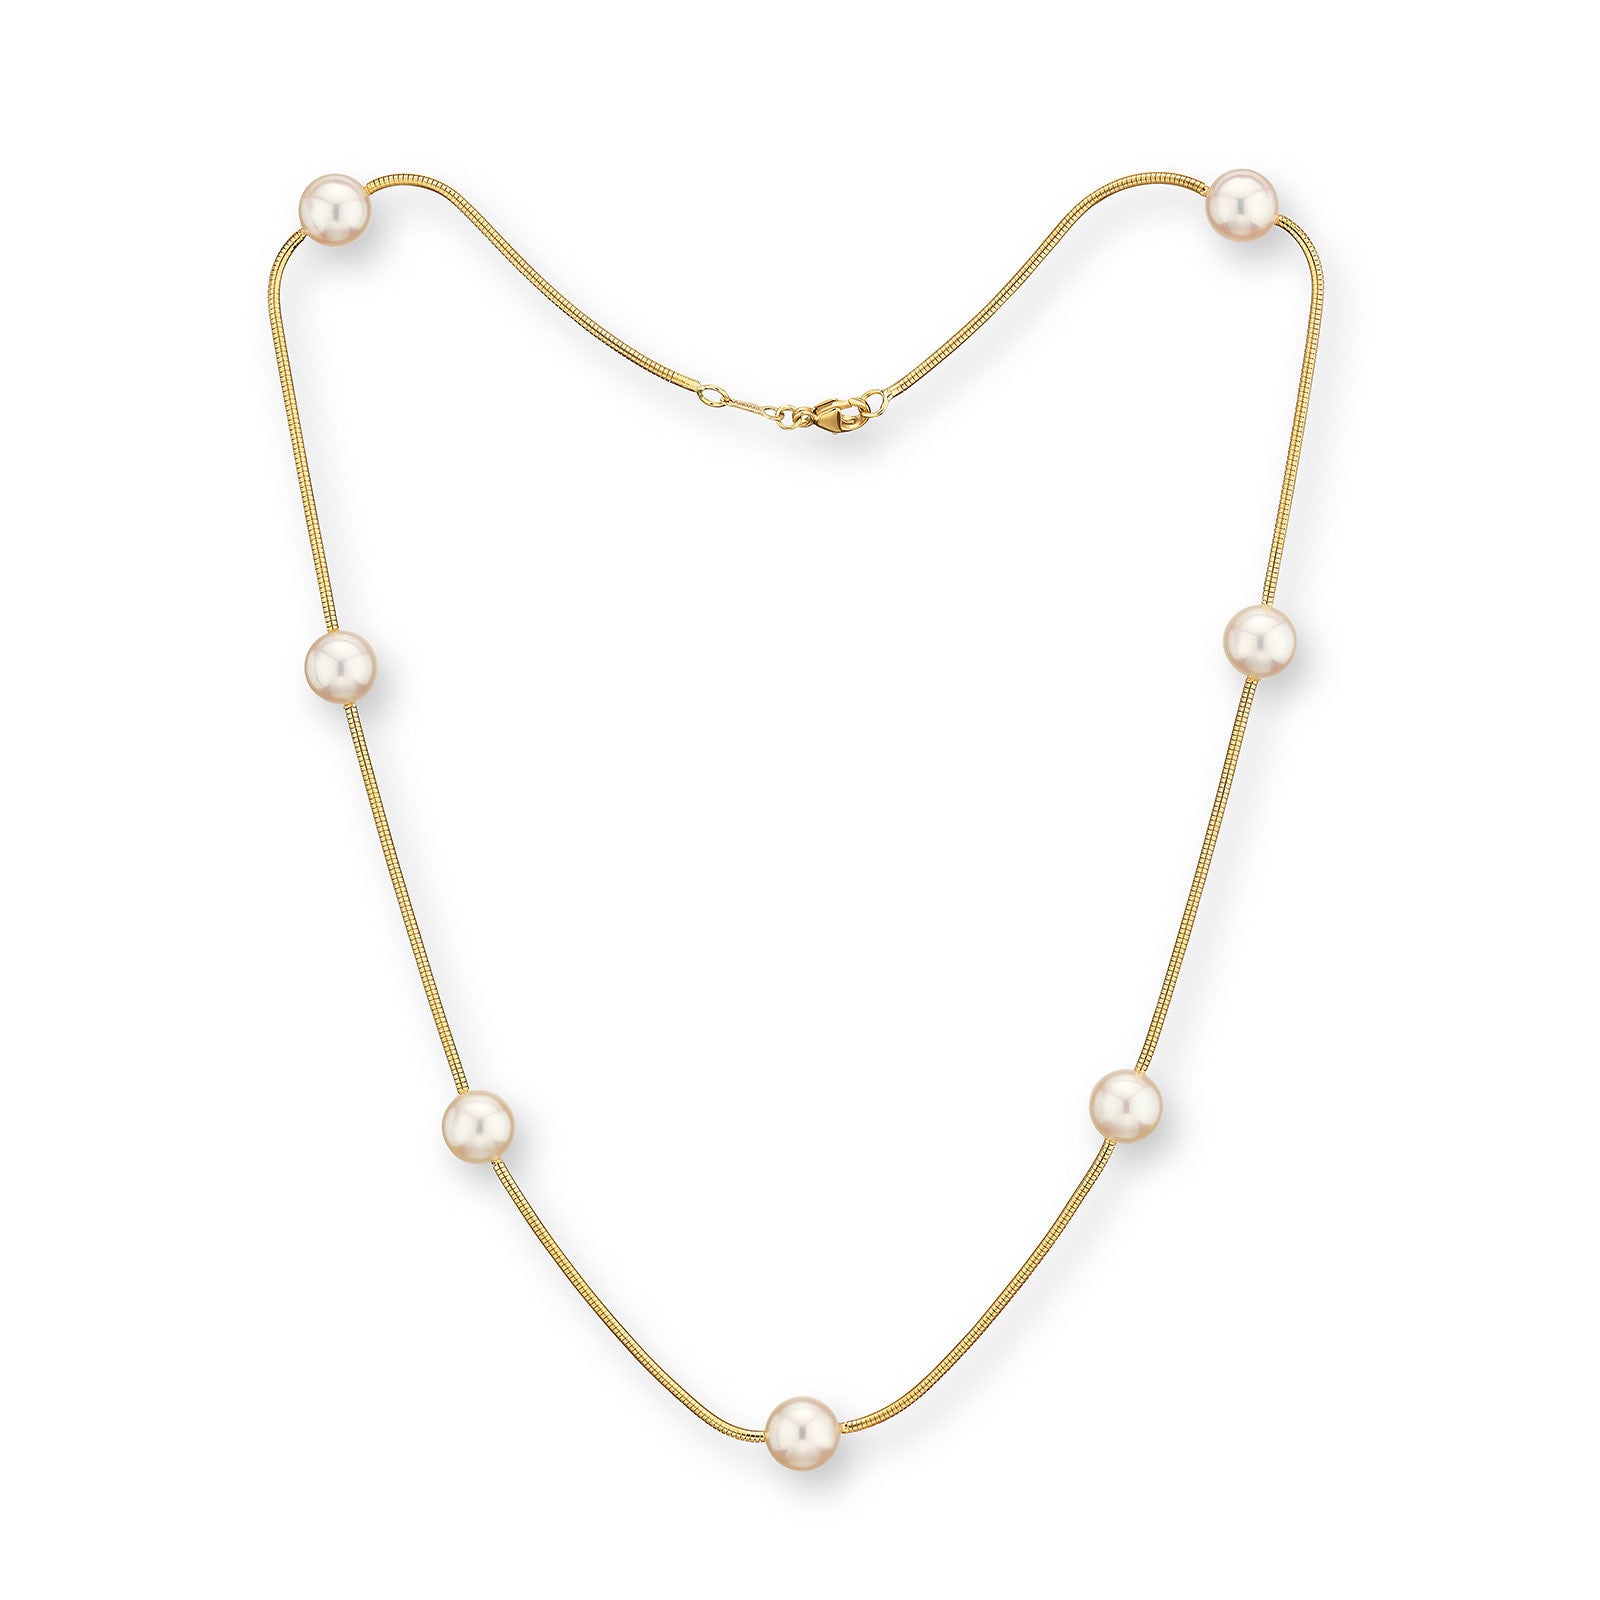 Spaced Pearl Necklace | Anthropologie